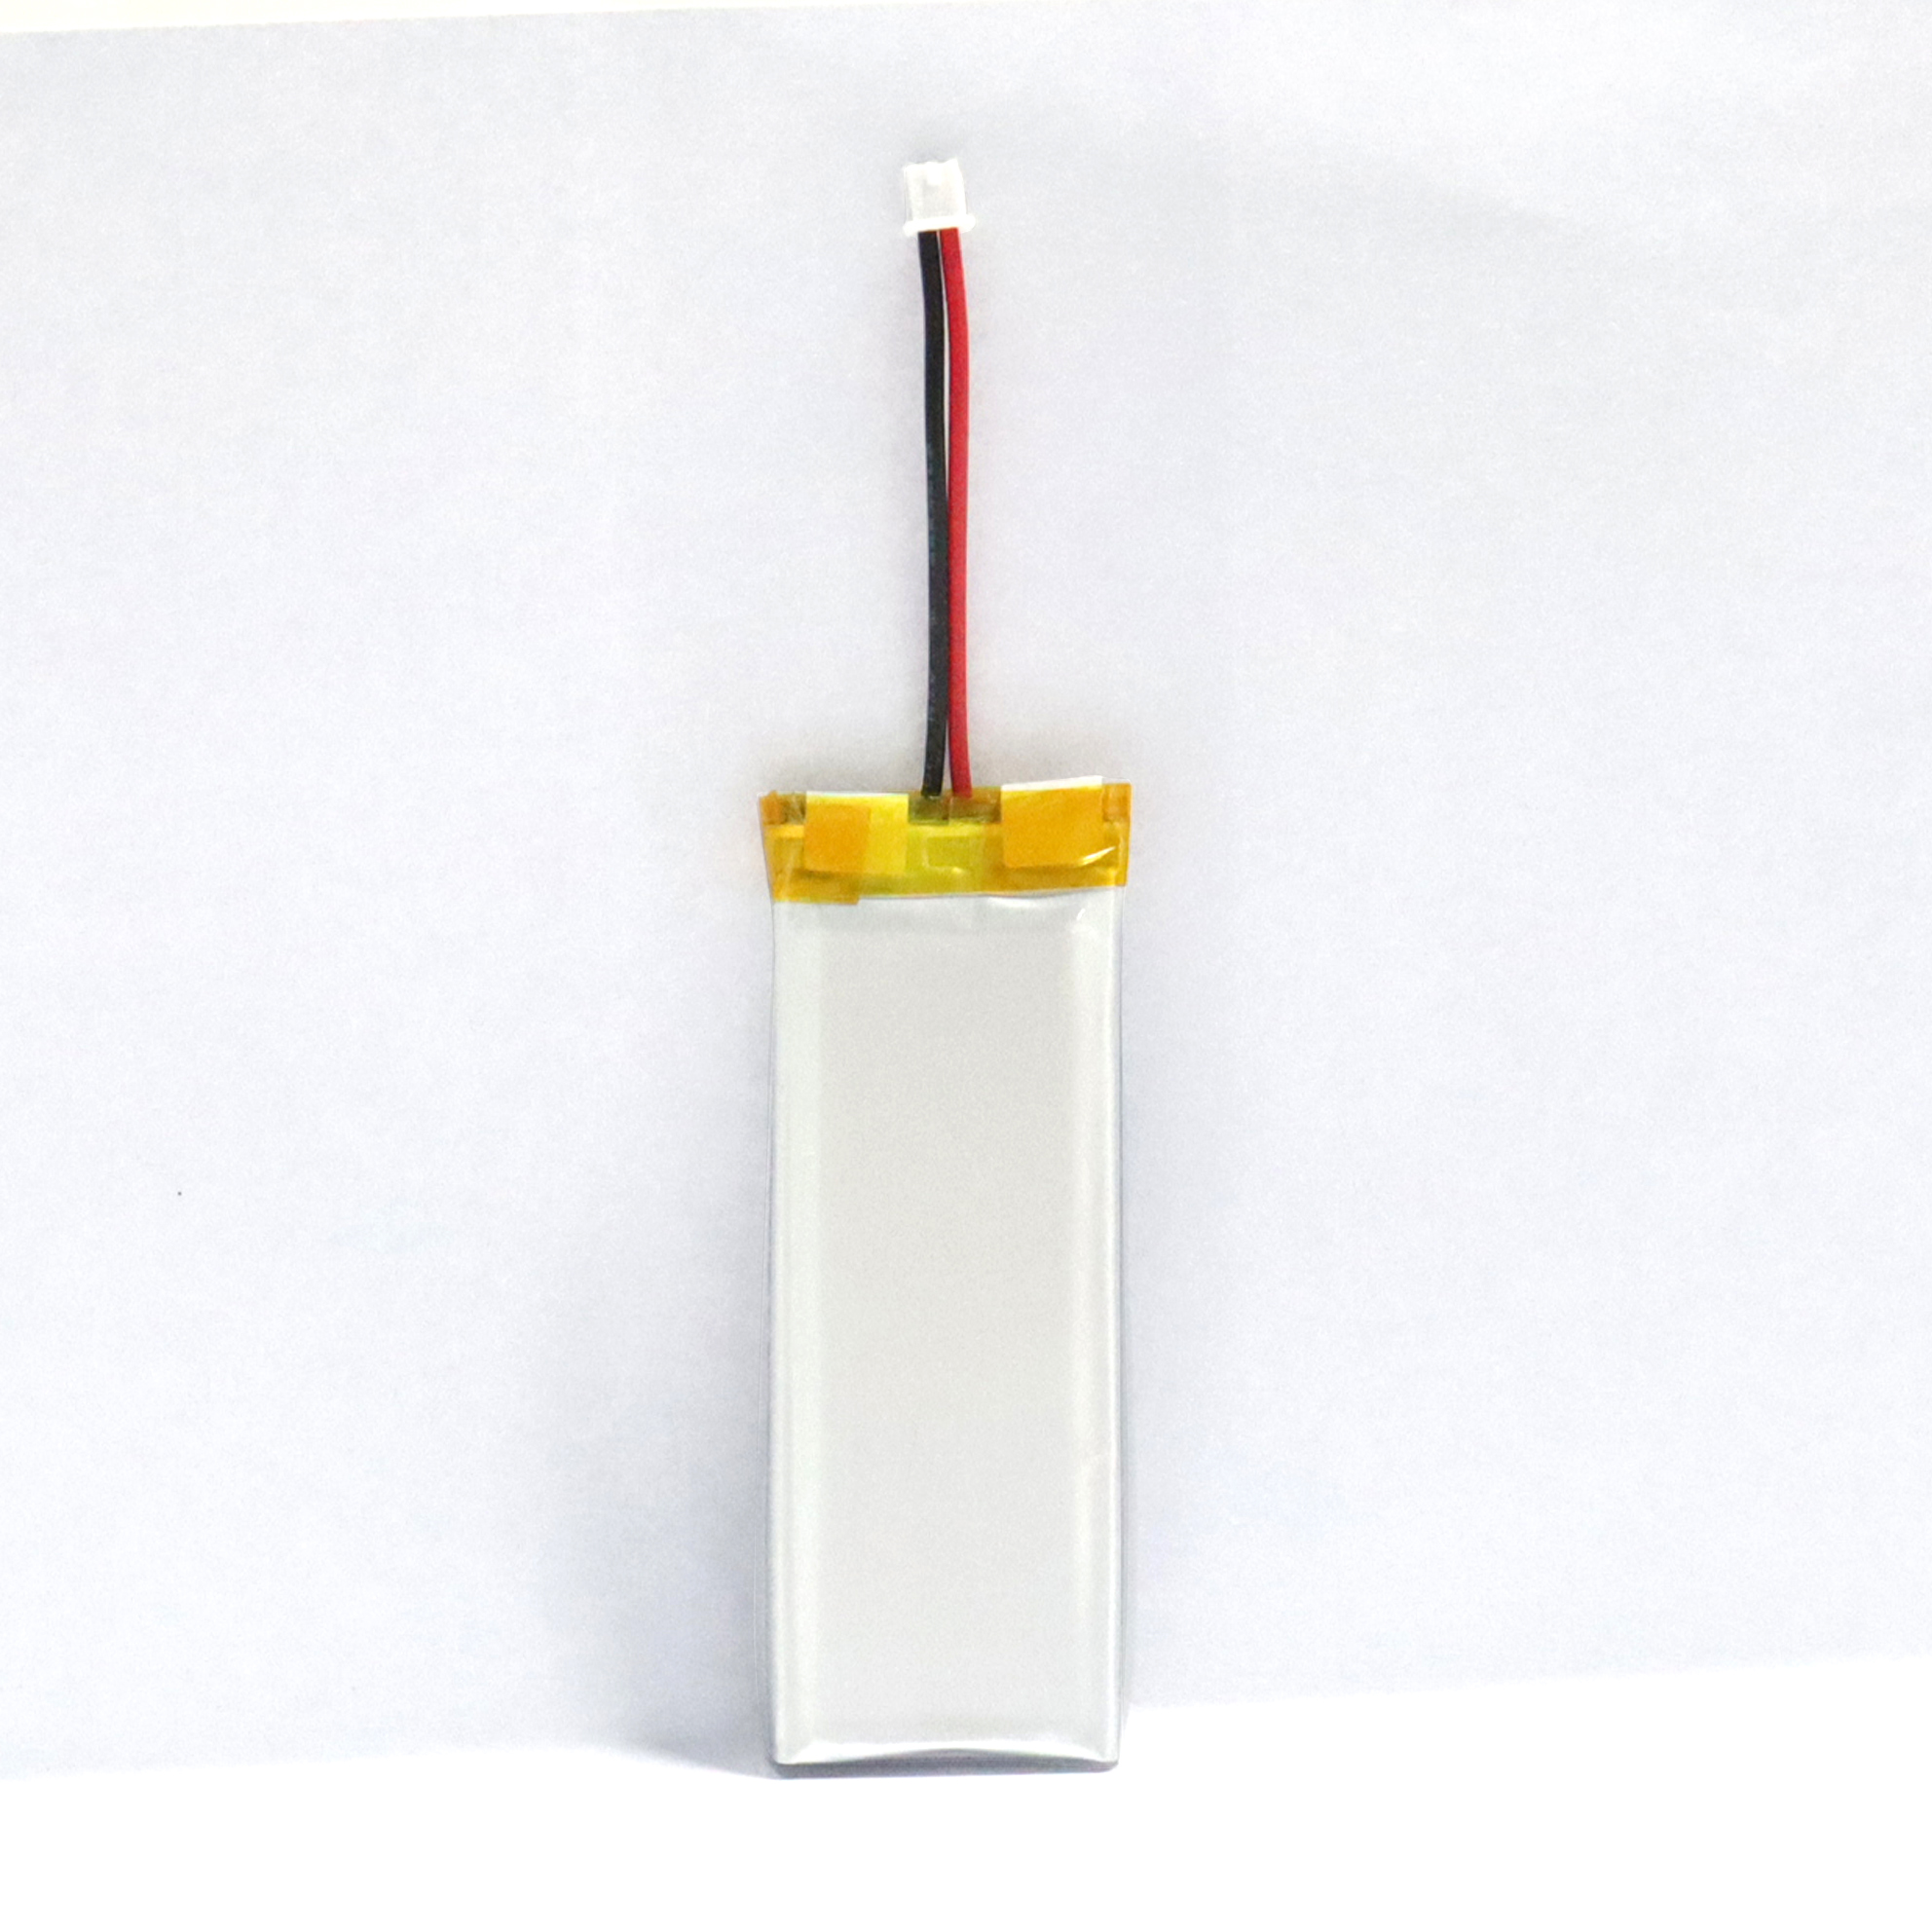 Lithium Polymer Battery 3.7V 640mAh for Bluetooth Device 